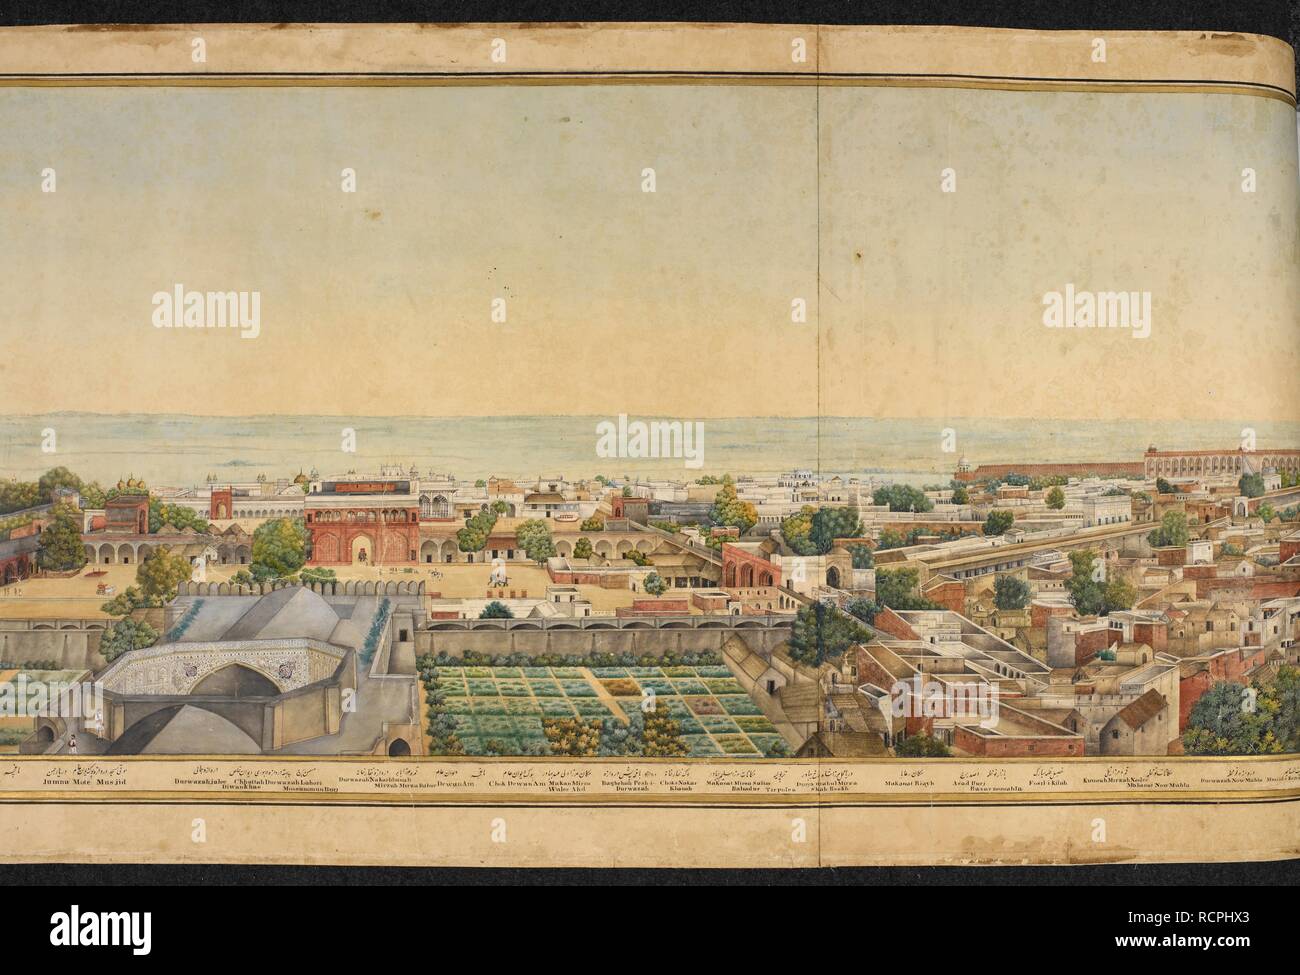 Section of a panorama of Delhi. A panoramic view of Delhi. 1846. From a panorama of Delhi taken through almost 360 degrees from the top of the Lahore gate of the Red Fort, Delhi. Water-colour and body-colour with gold; 665 by 4908 mm (530 by 4828 mm within frame) on five sheets of paper, glued together to form a scroll. Source: Add.Or.4126. Language: Persian, English and Urdu. Author: Khan, Mazhar 'Ali. Stock Photo